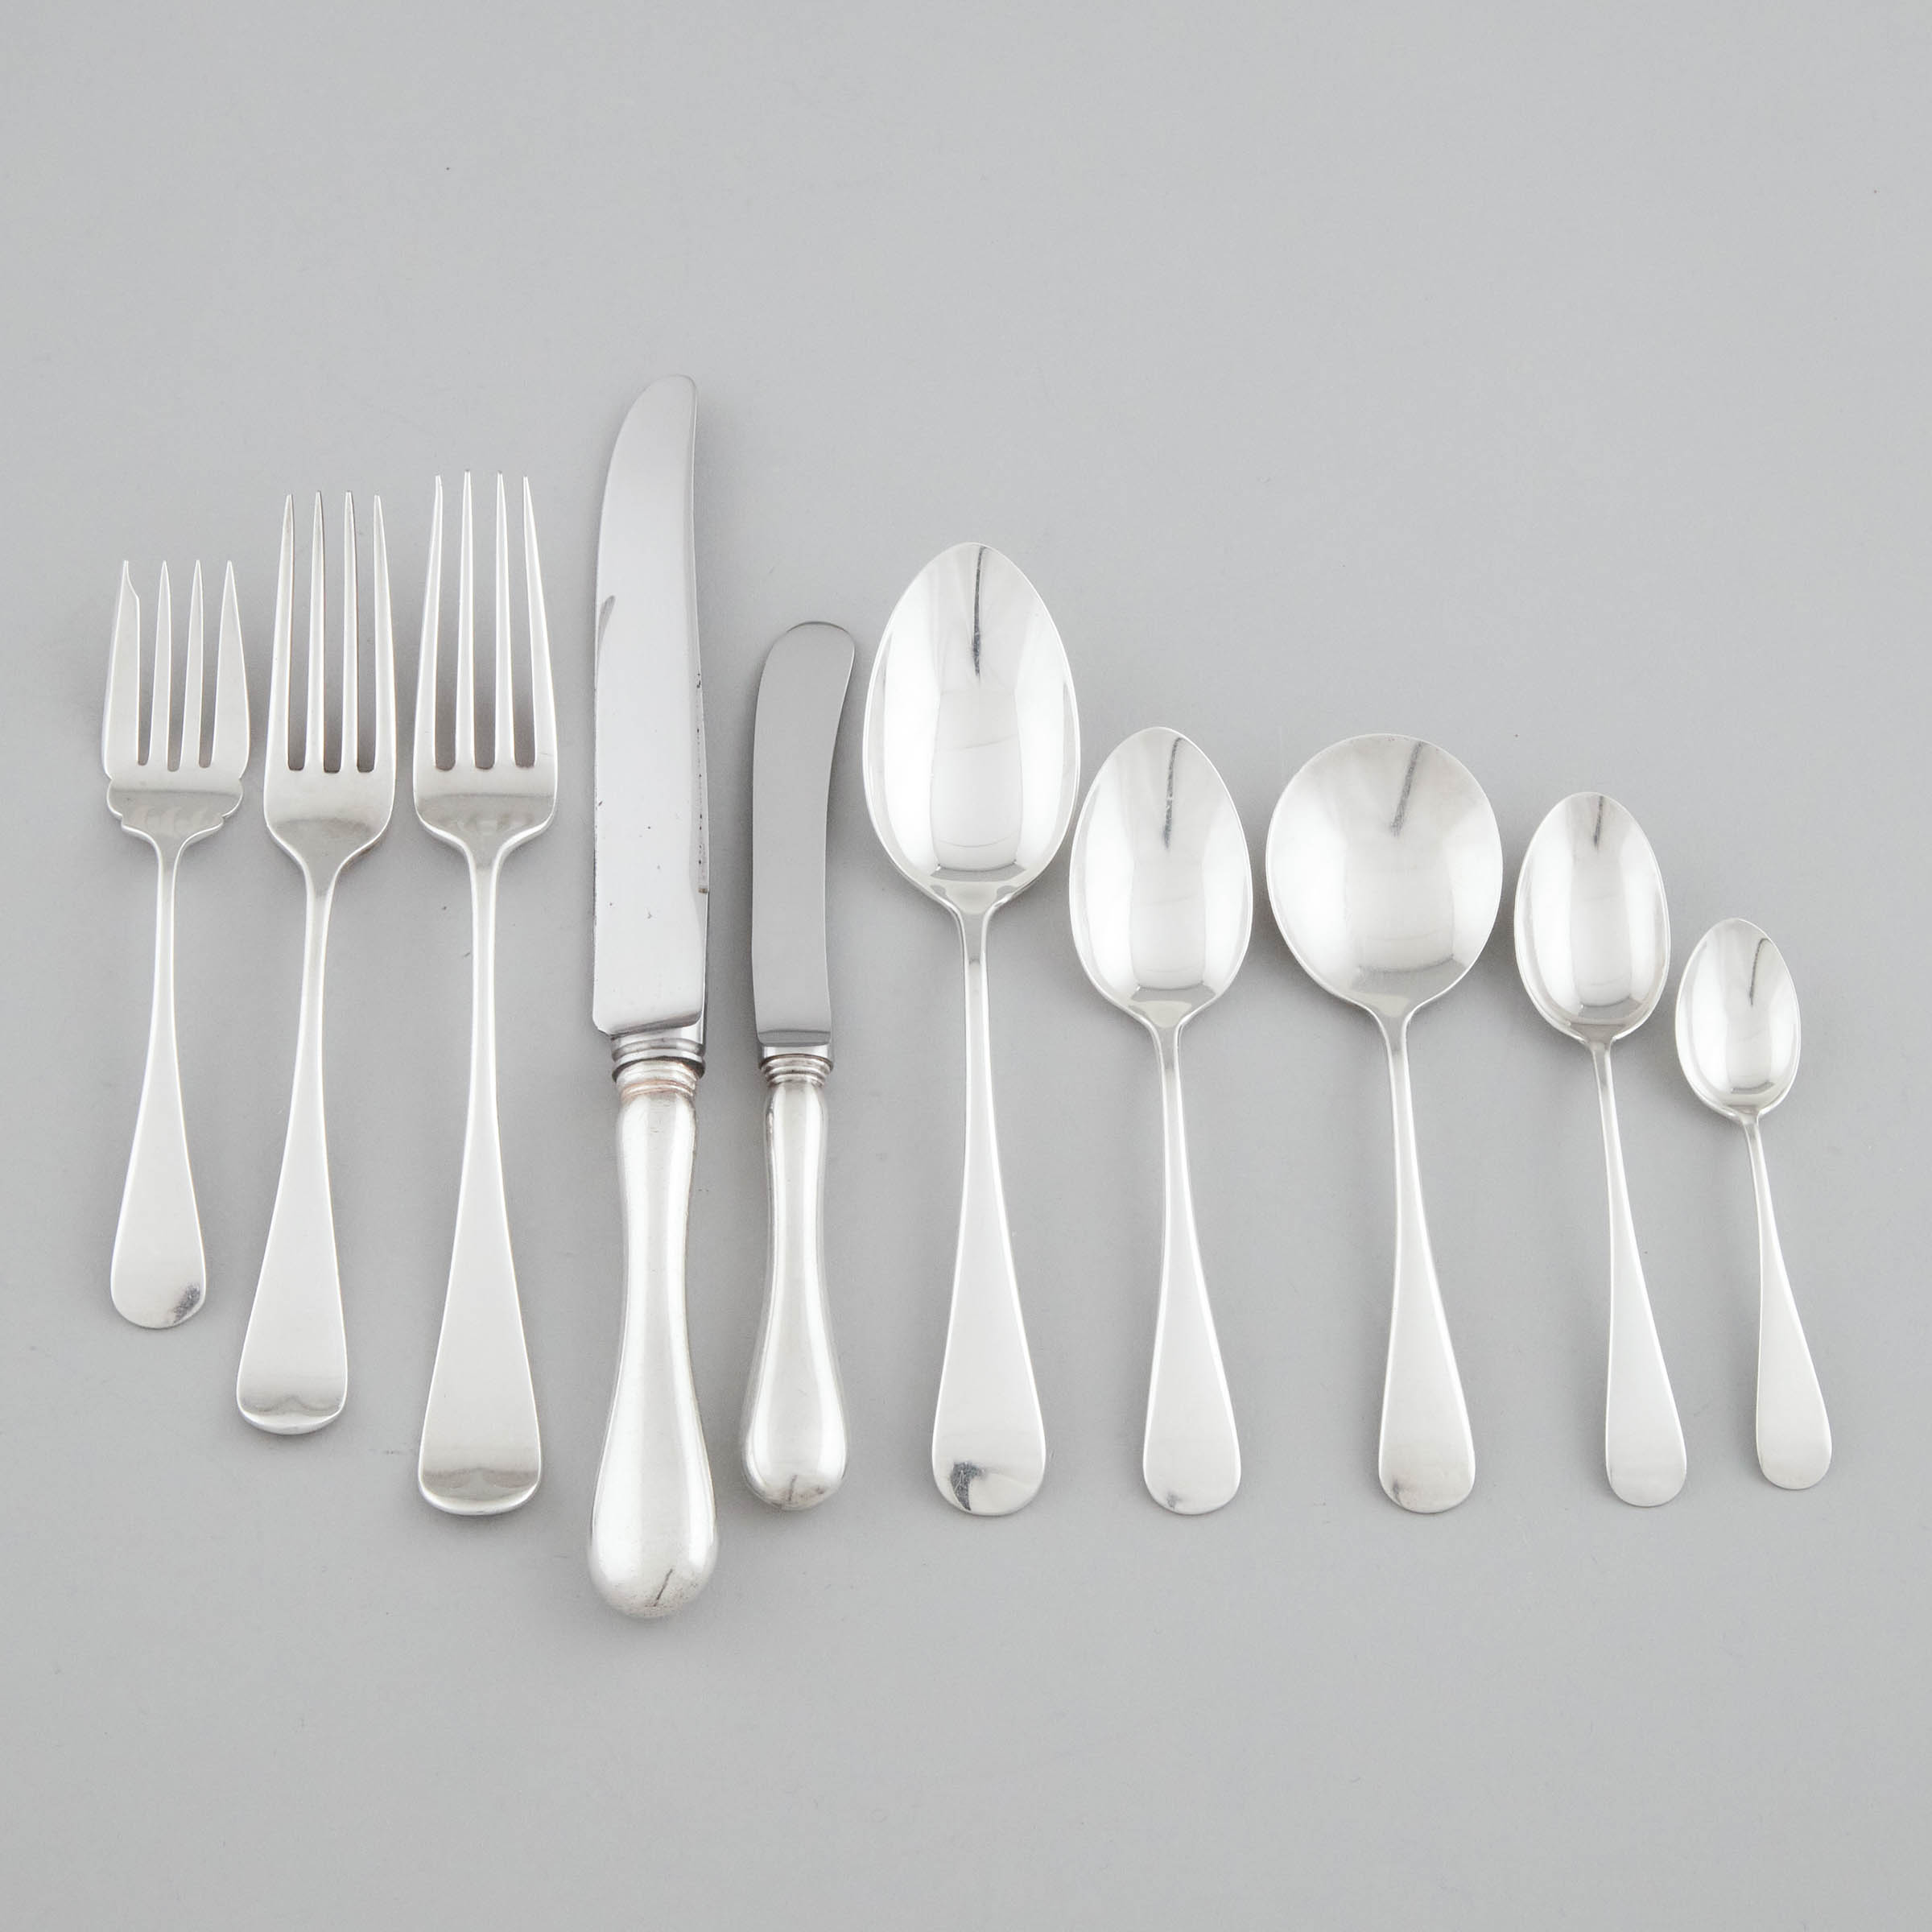 Canadian Silver 'Old English' Pattern Flatware Service, Henry Birks & Sons, Montreal, Que., 20th century